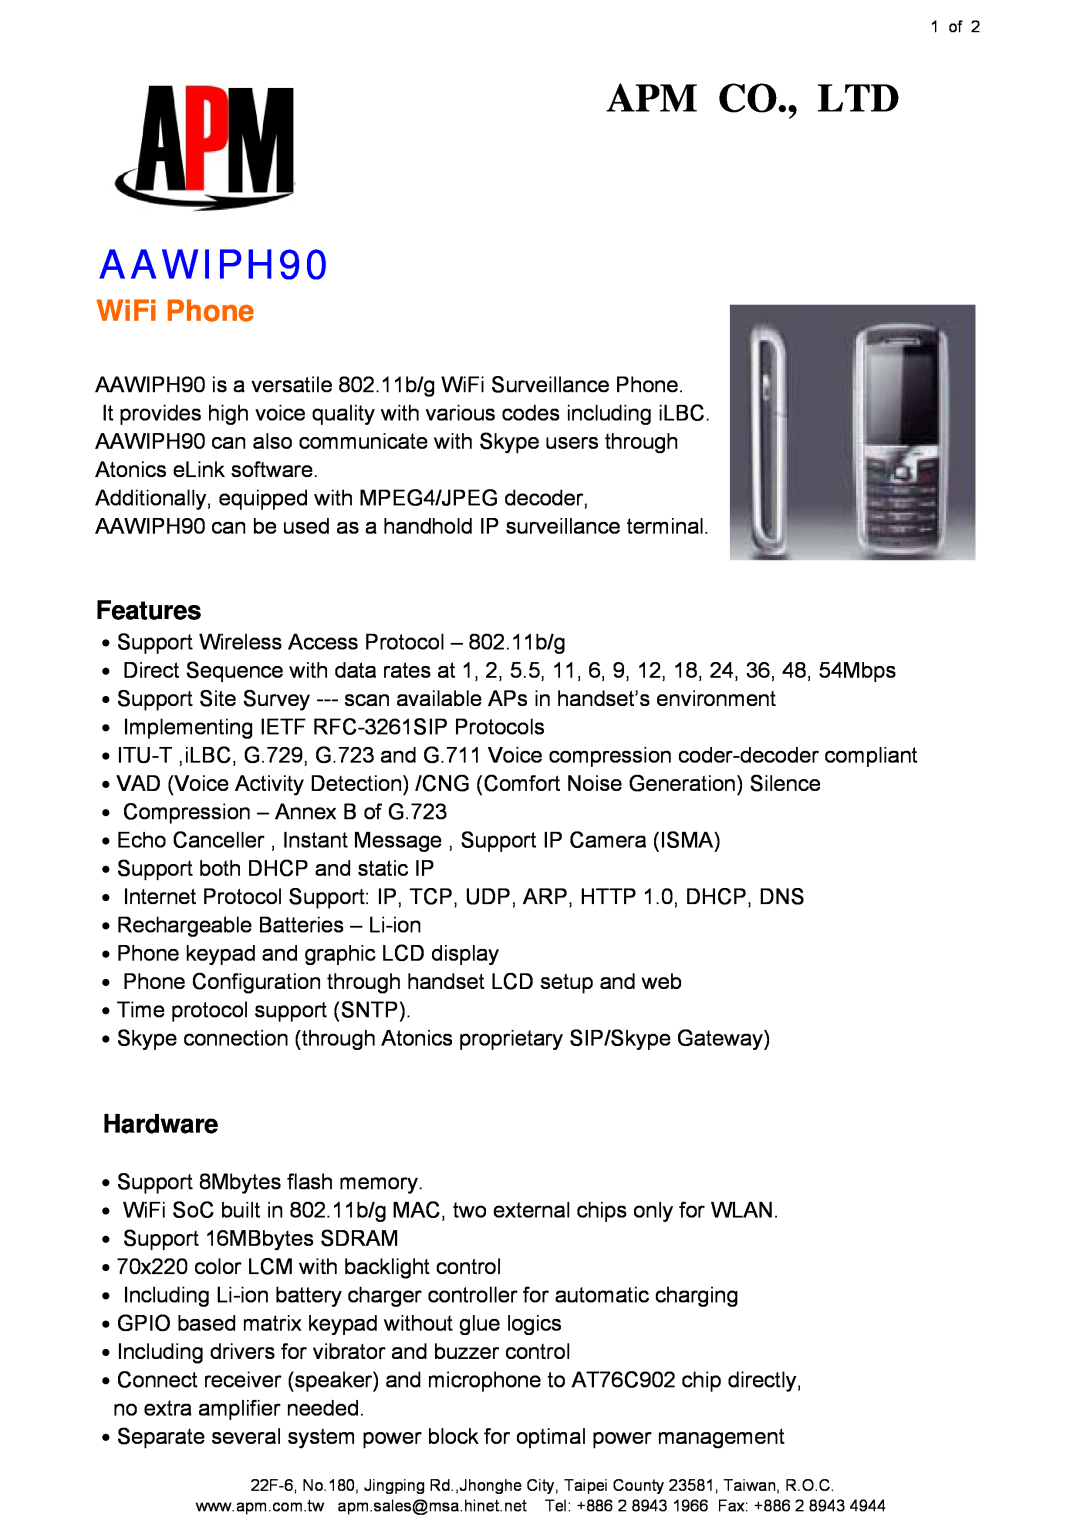 APM AAWIPH90 manual Features, Hardware, WiFi Phone 